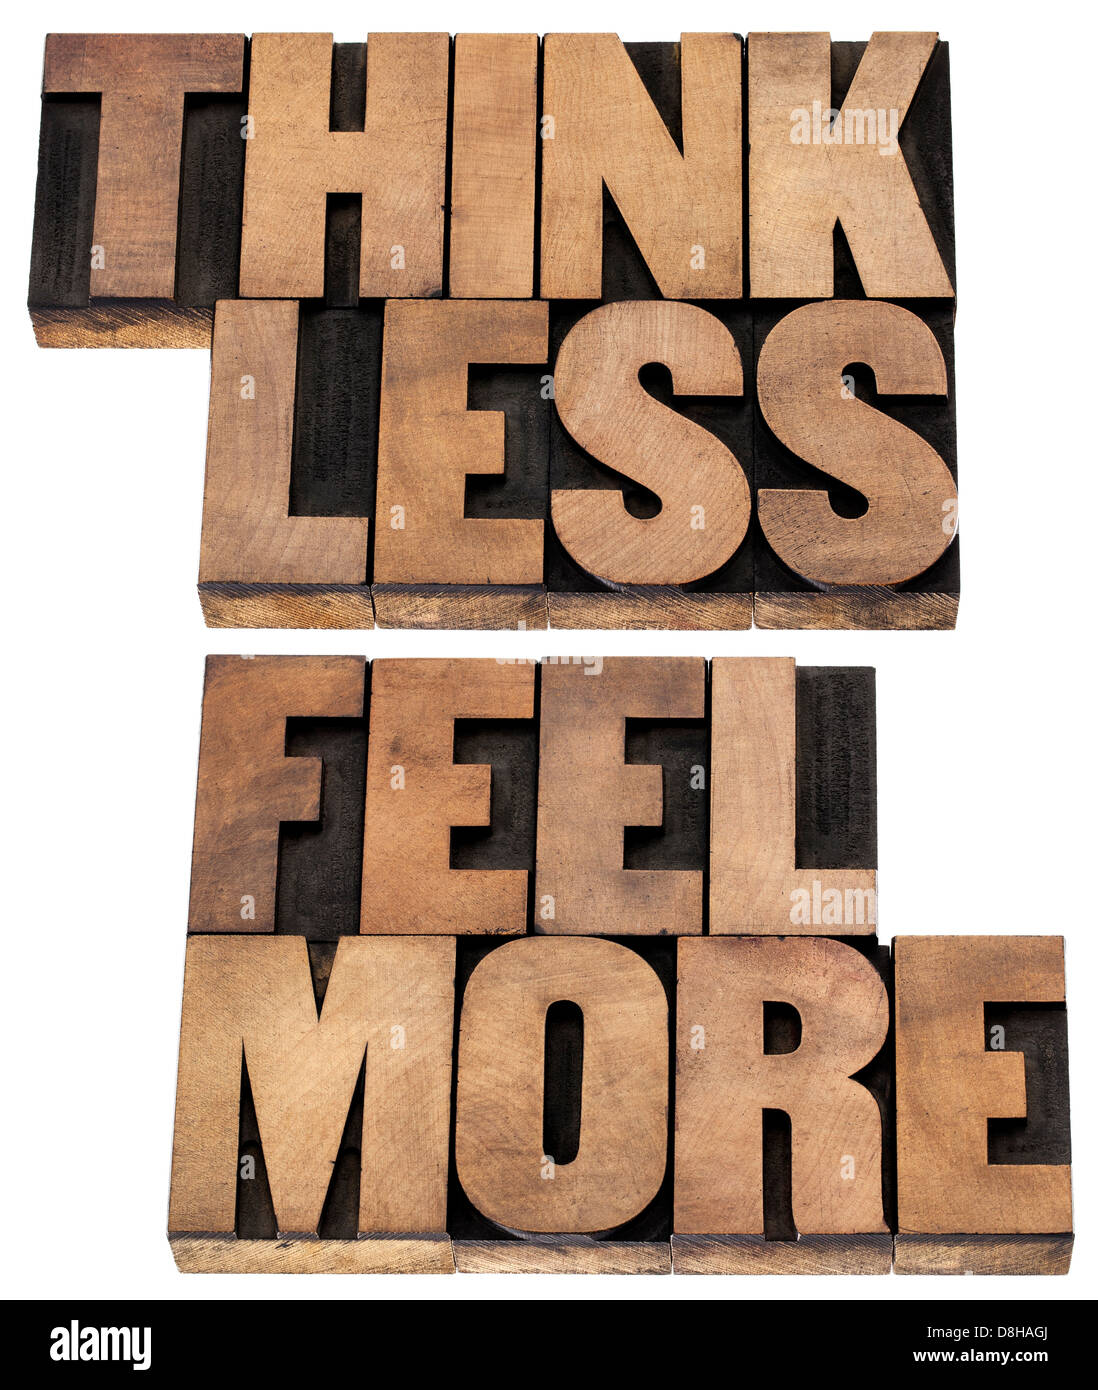 think less, feel more - words of wisdom - isolated tex in vintage letterpress wood type Stock Photo